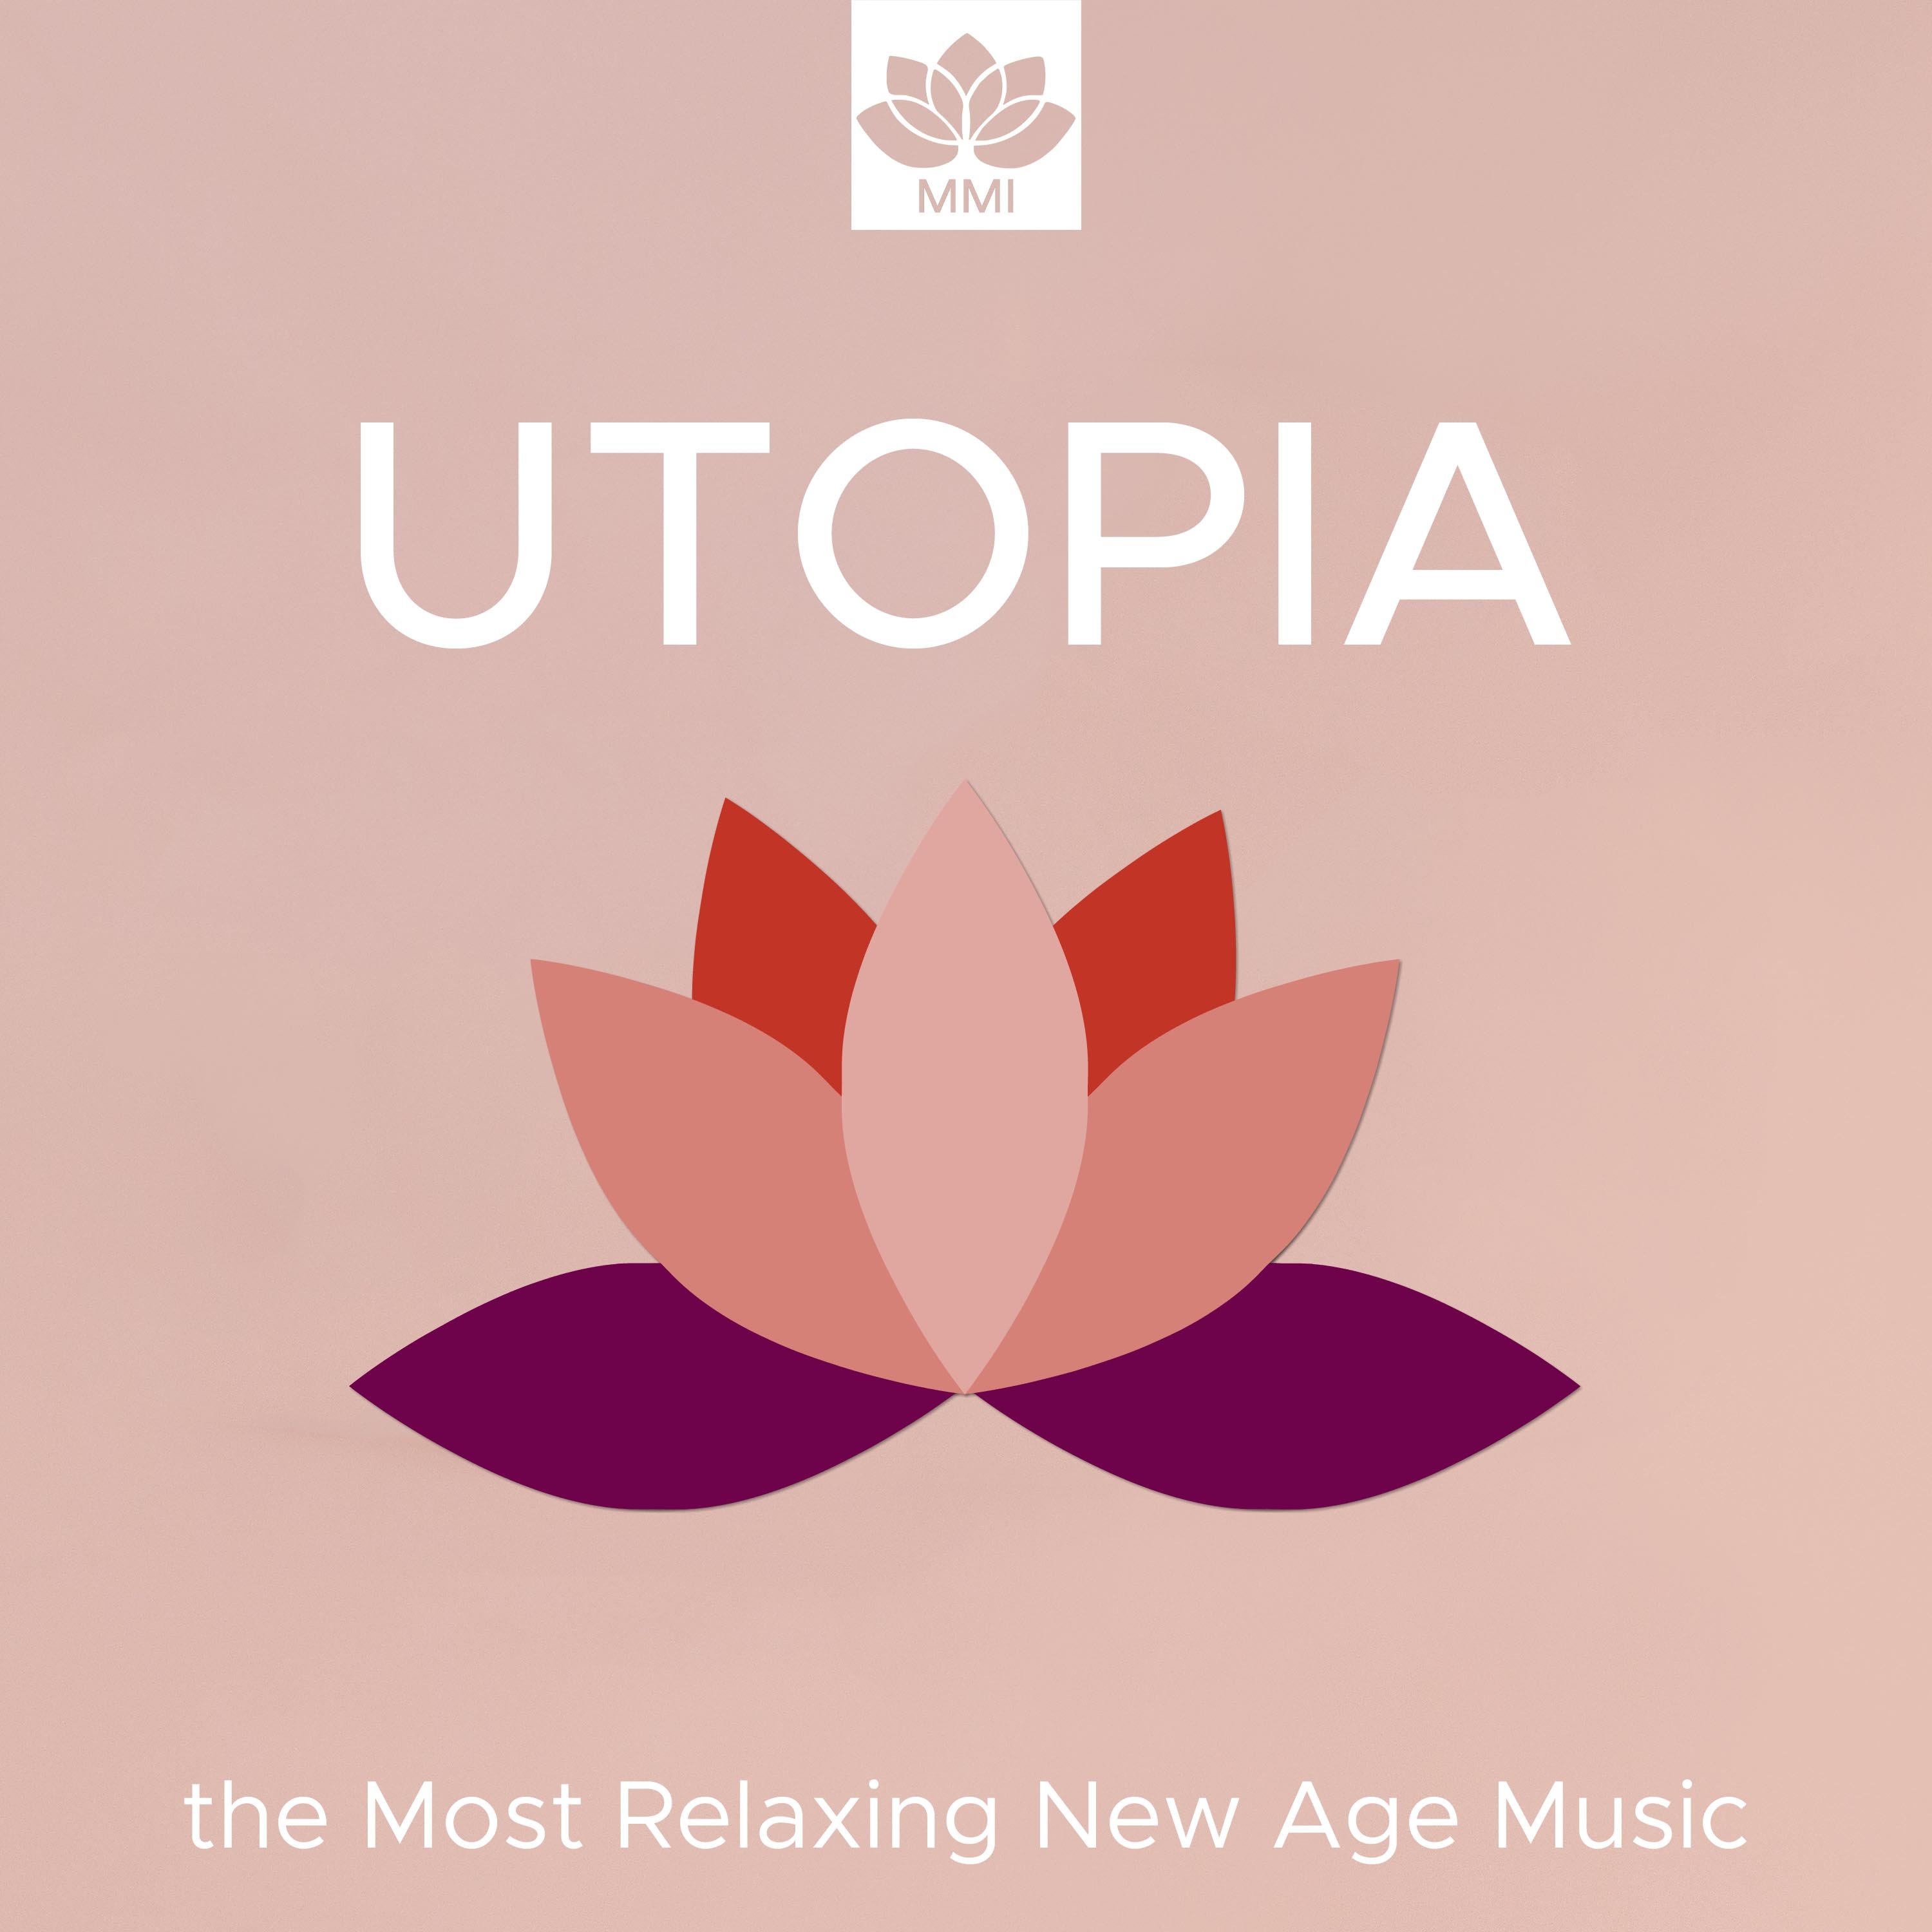 Utopia - The Latest Collection of the Most Relaxing New Age Music to Soothe your Body Memory and Six Senses with Nature Sounds likes Rain, Sea Waves and Wind